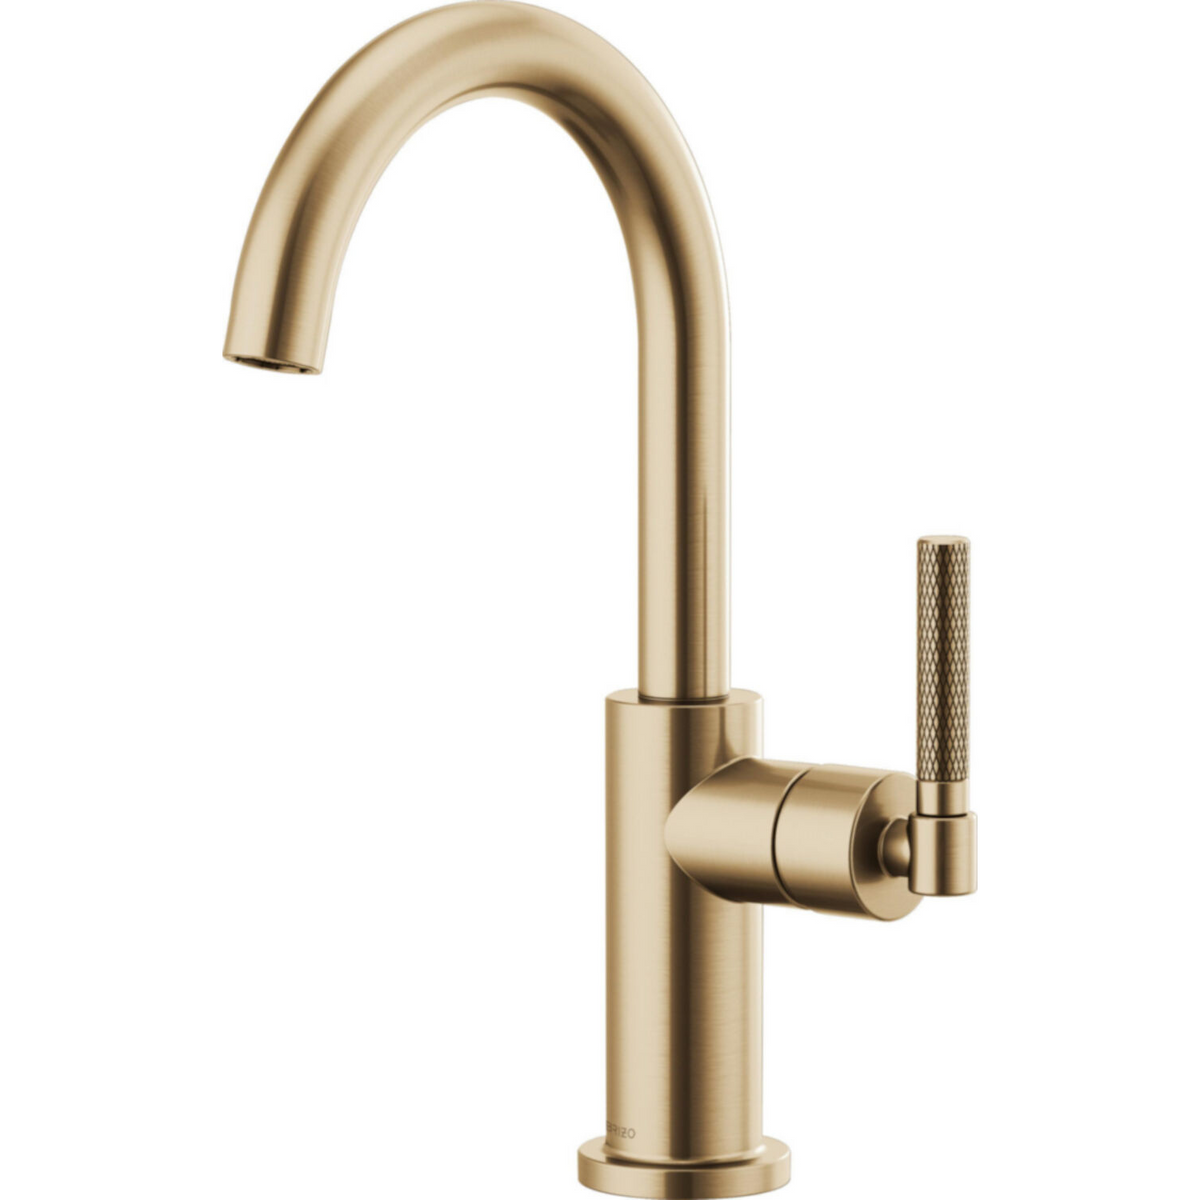 LITZE BAR FAUCET WITH ARC SPOUT AND KNURLED HANDLE